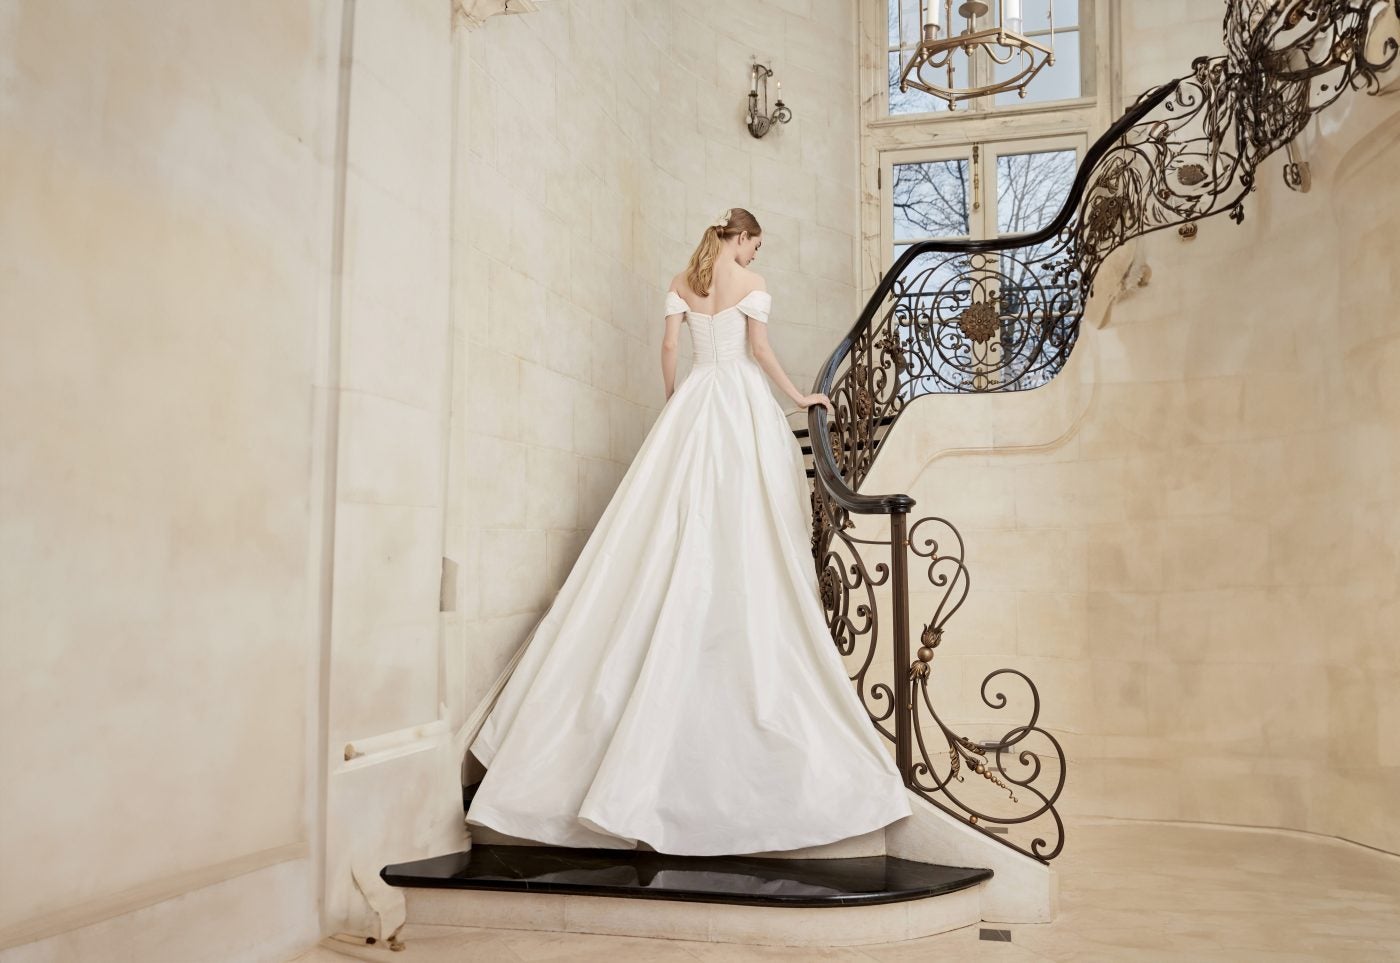 Champagne Wedding Dresses - Largest Selection - Kleinfeld